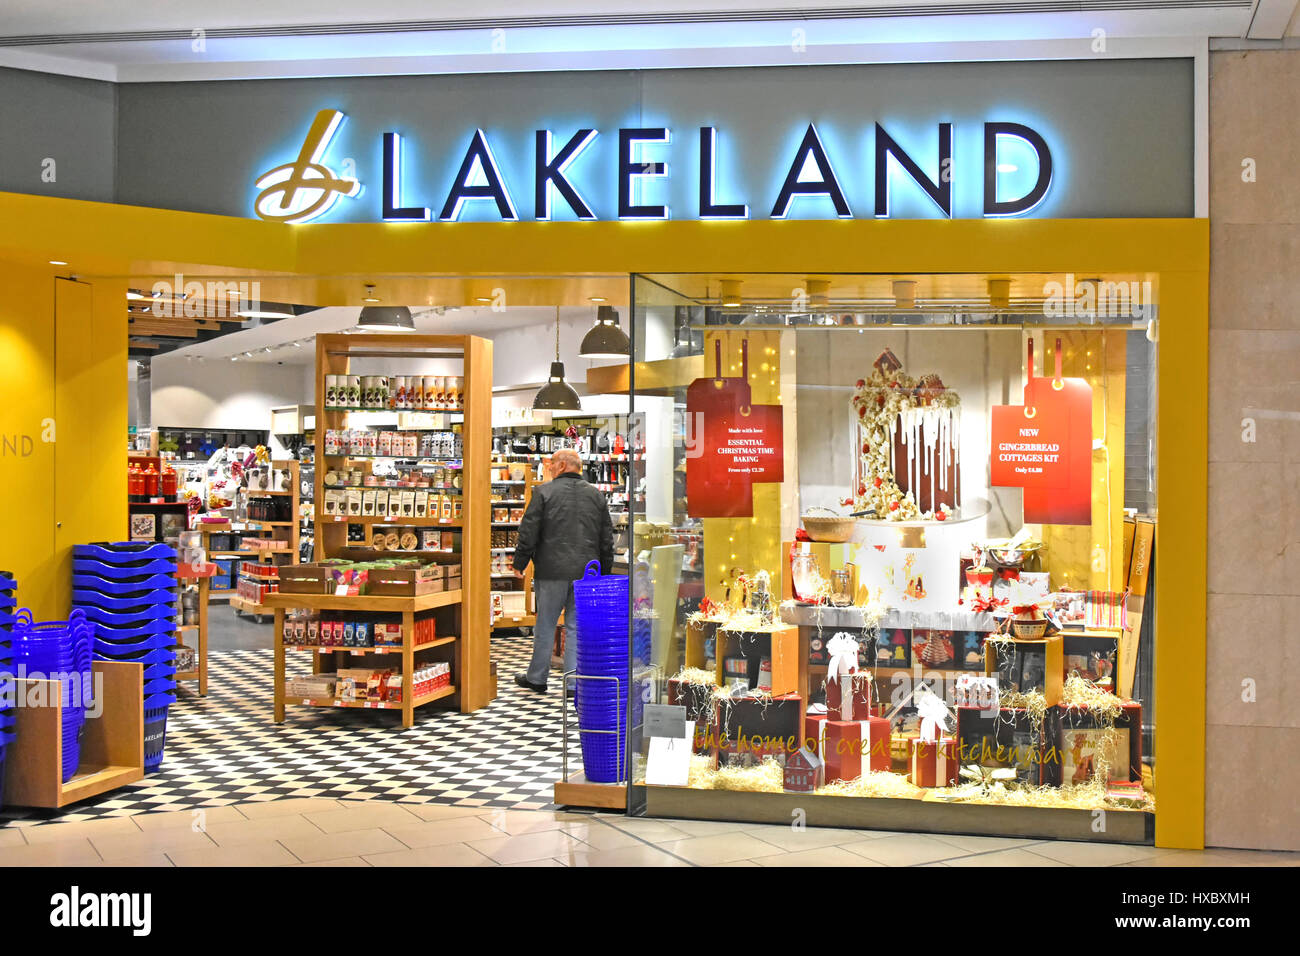 Entrance to Lakeland kitchenware stores in shopping mall in Intu